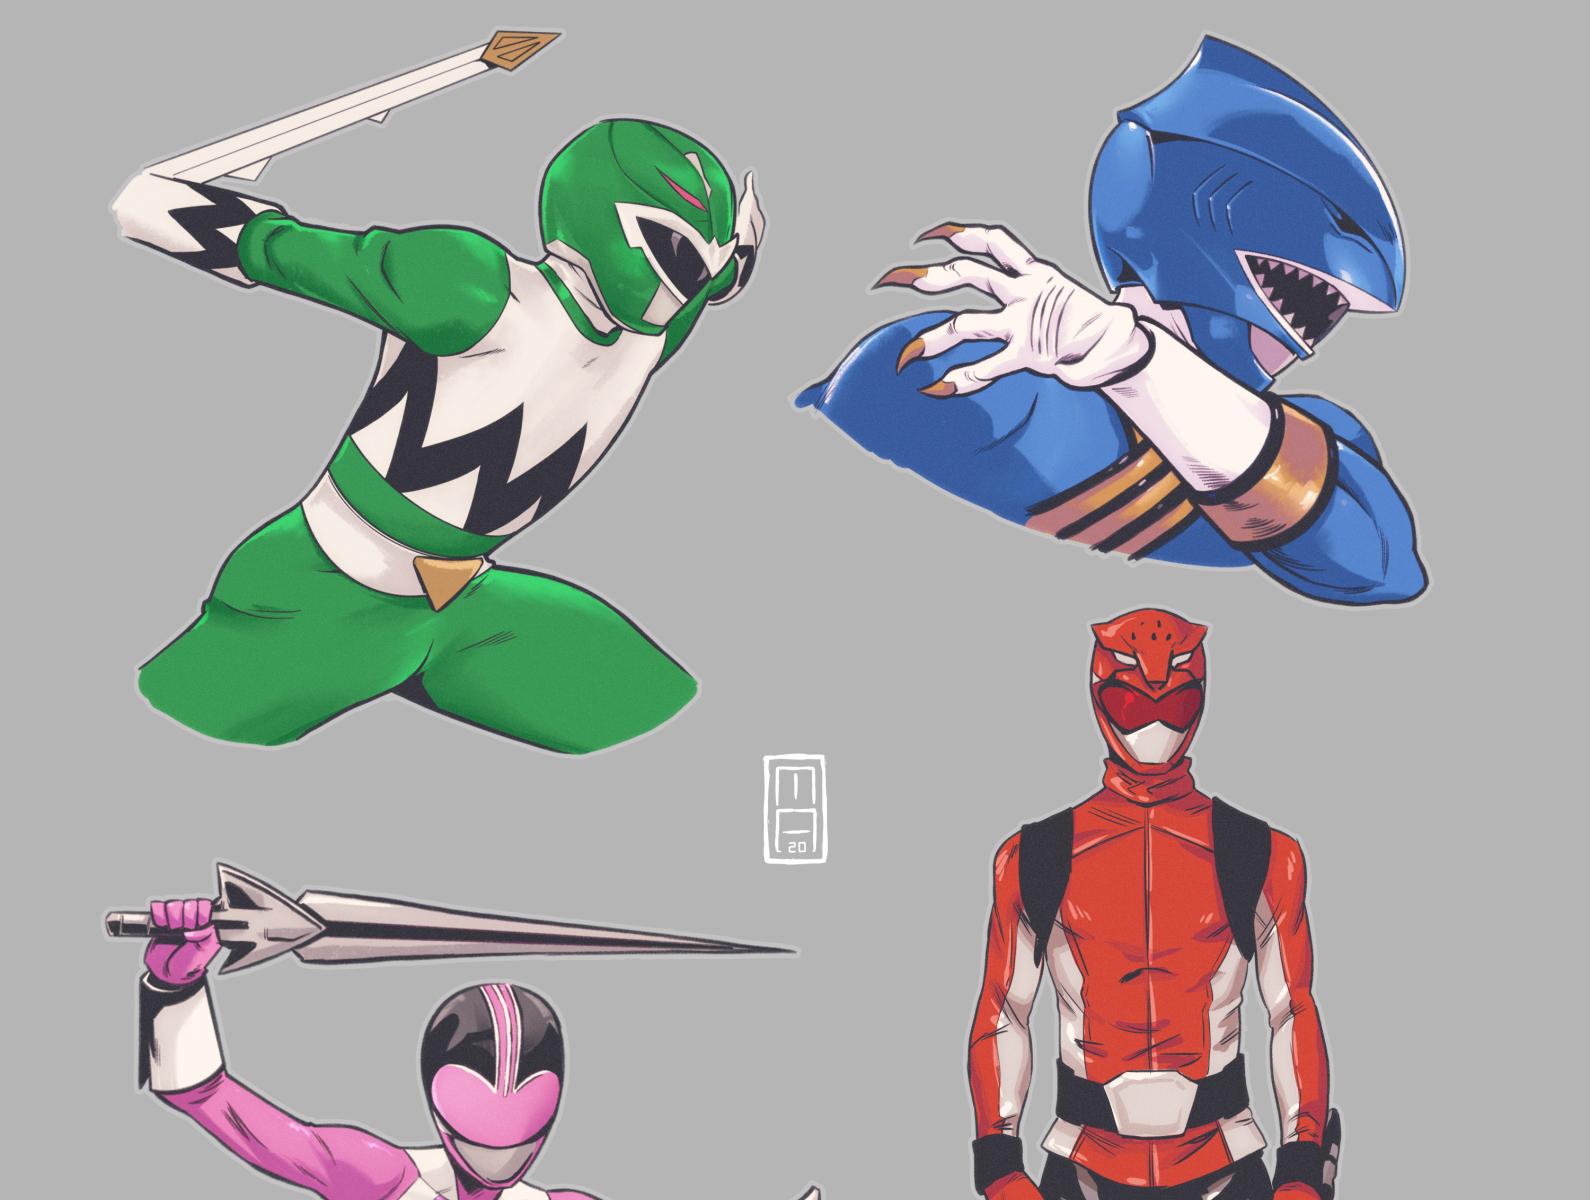 Any anime with a super sentaiPower Ranger vibe to it  rAnimesuggest